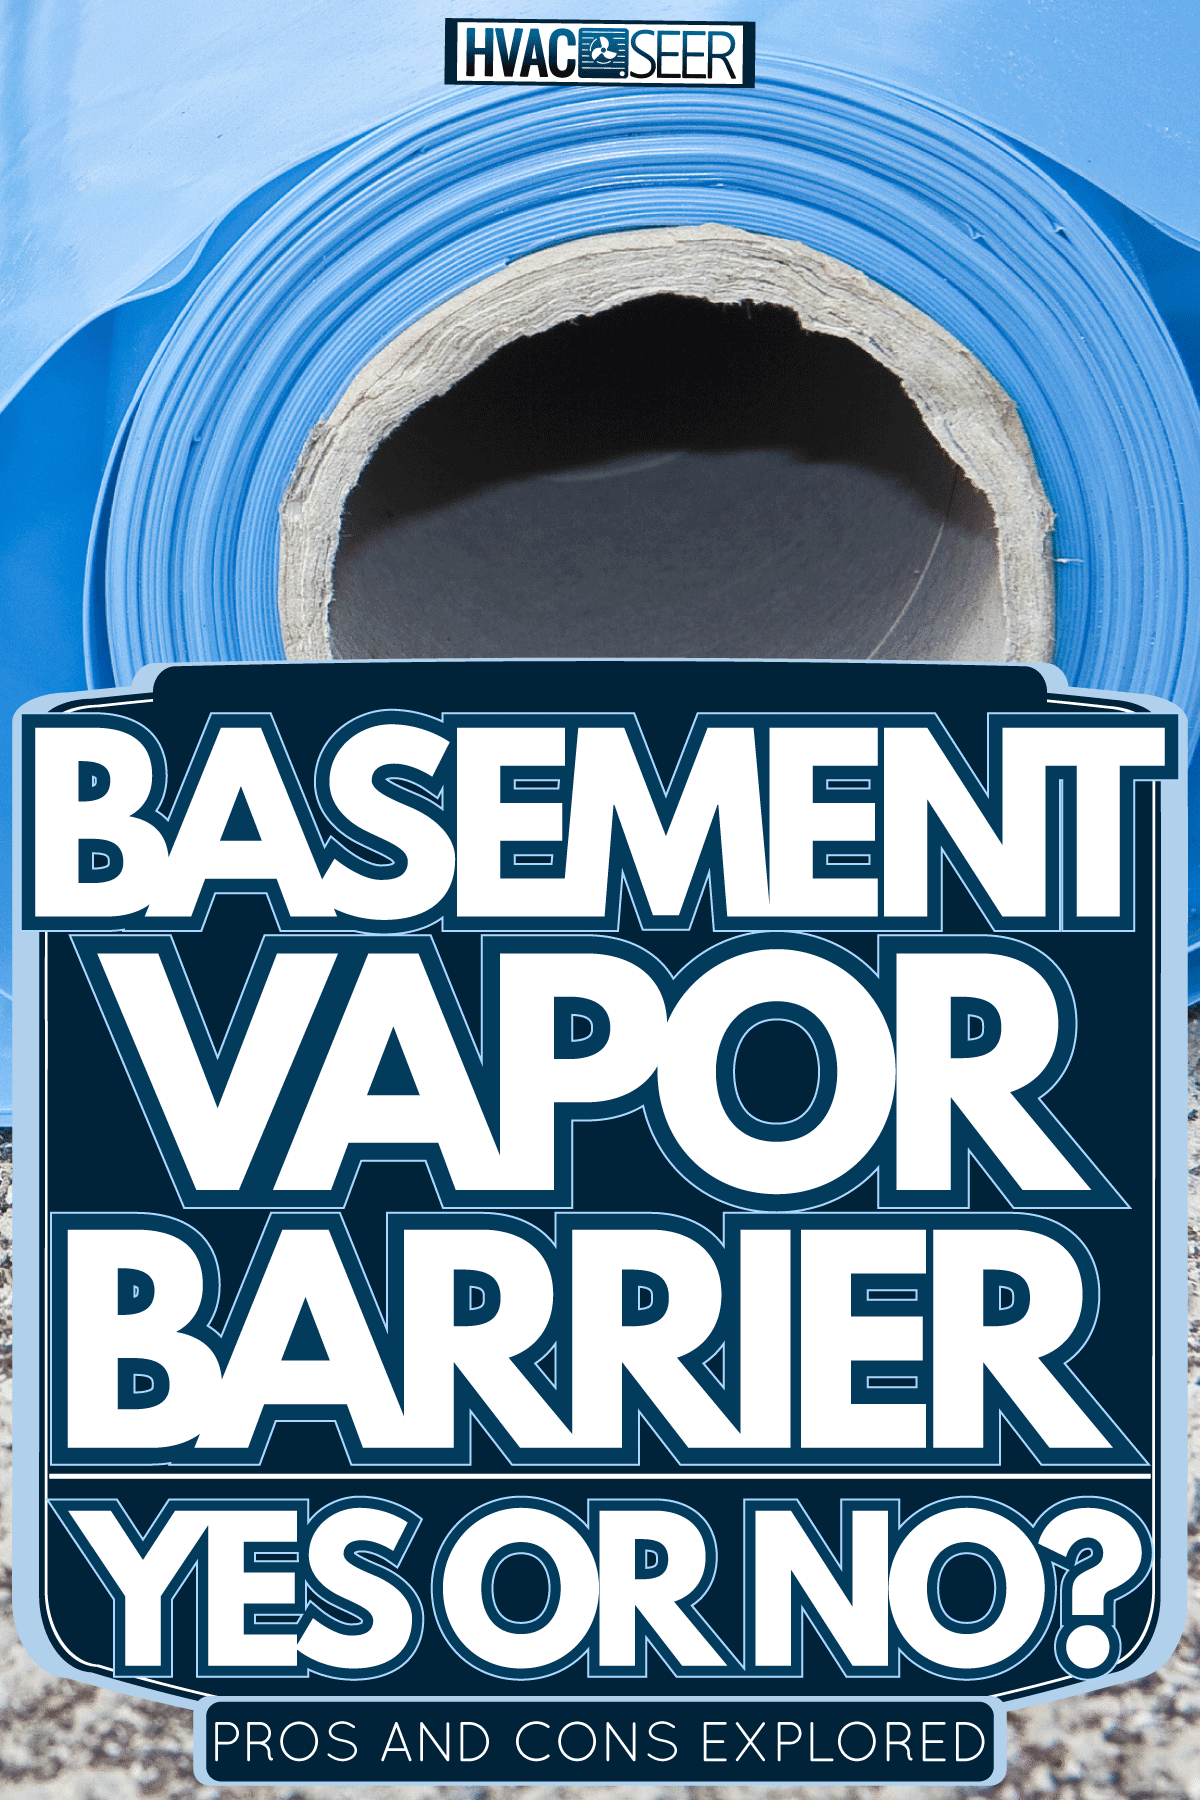 Vapor barrier membrane roll used for the insulation of roofs together with thermal insulation panels, Basement Vapor Barrier Yes Or No? Pros and Cons Explored